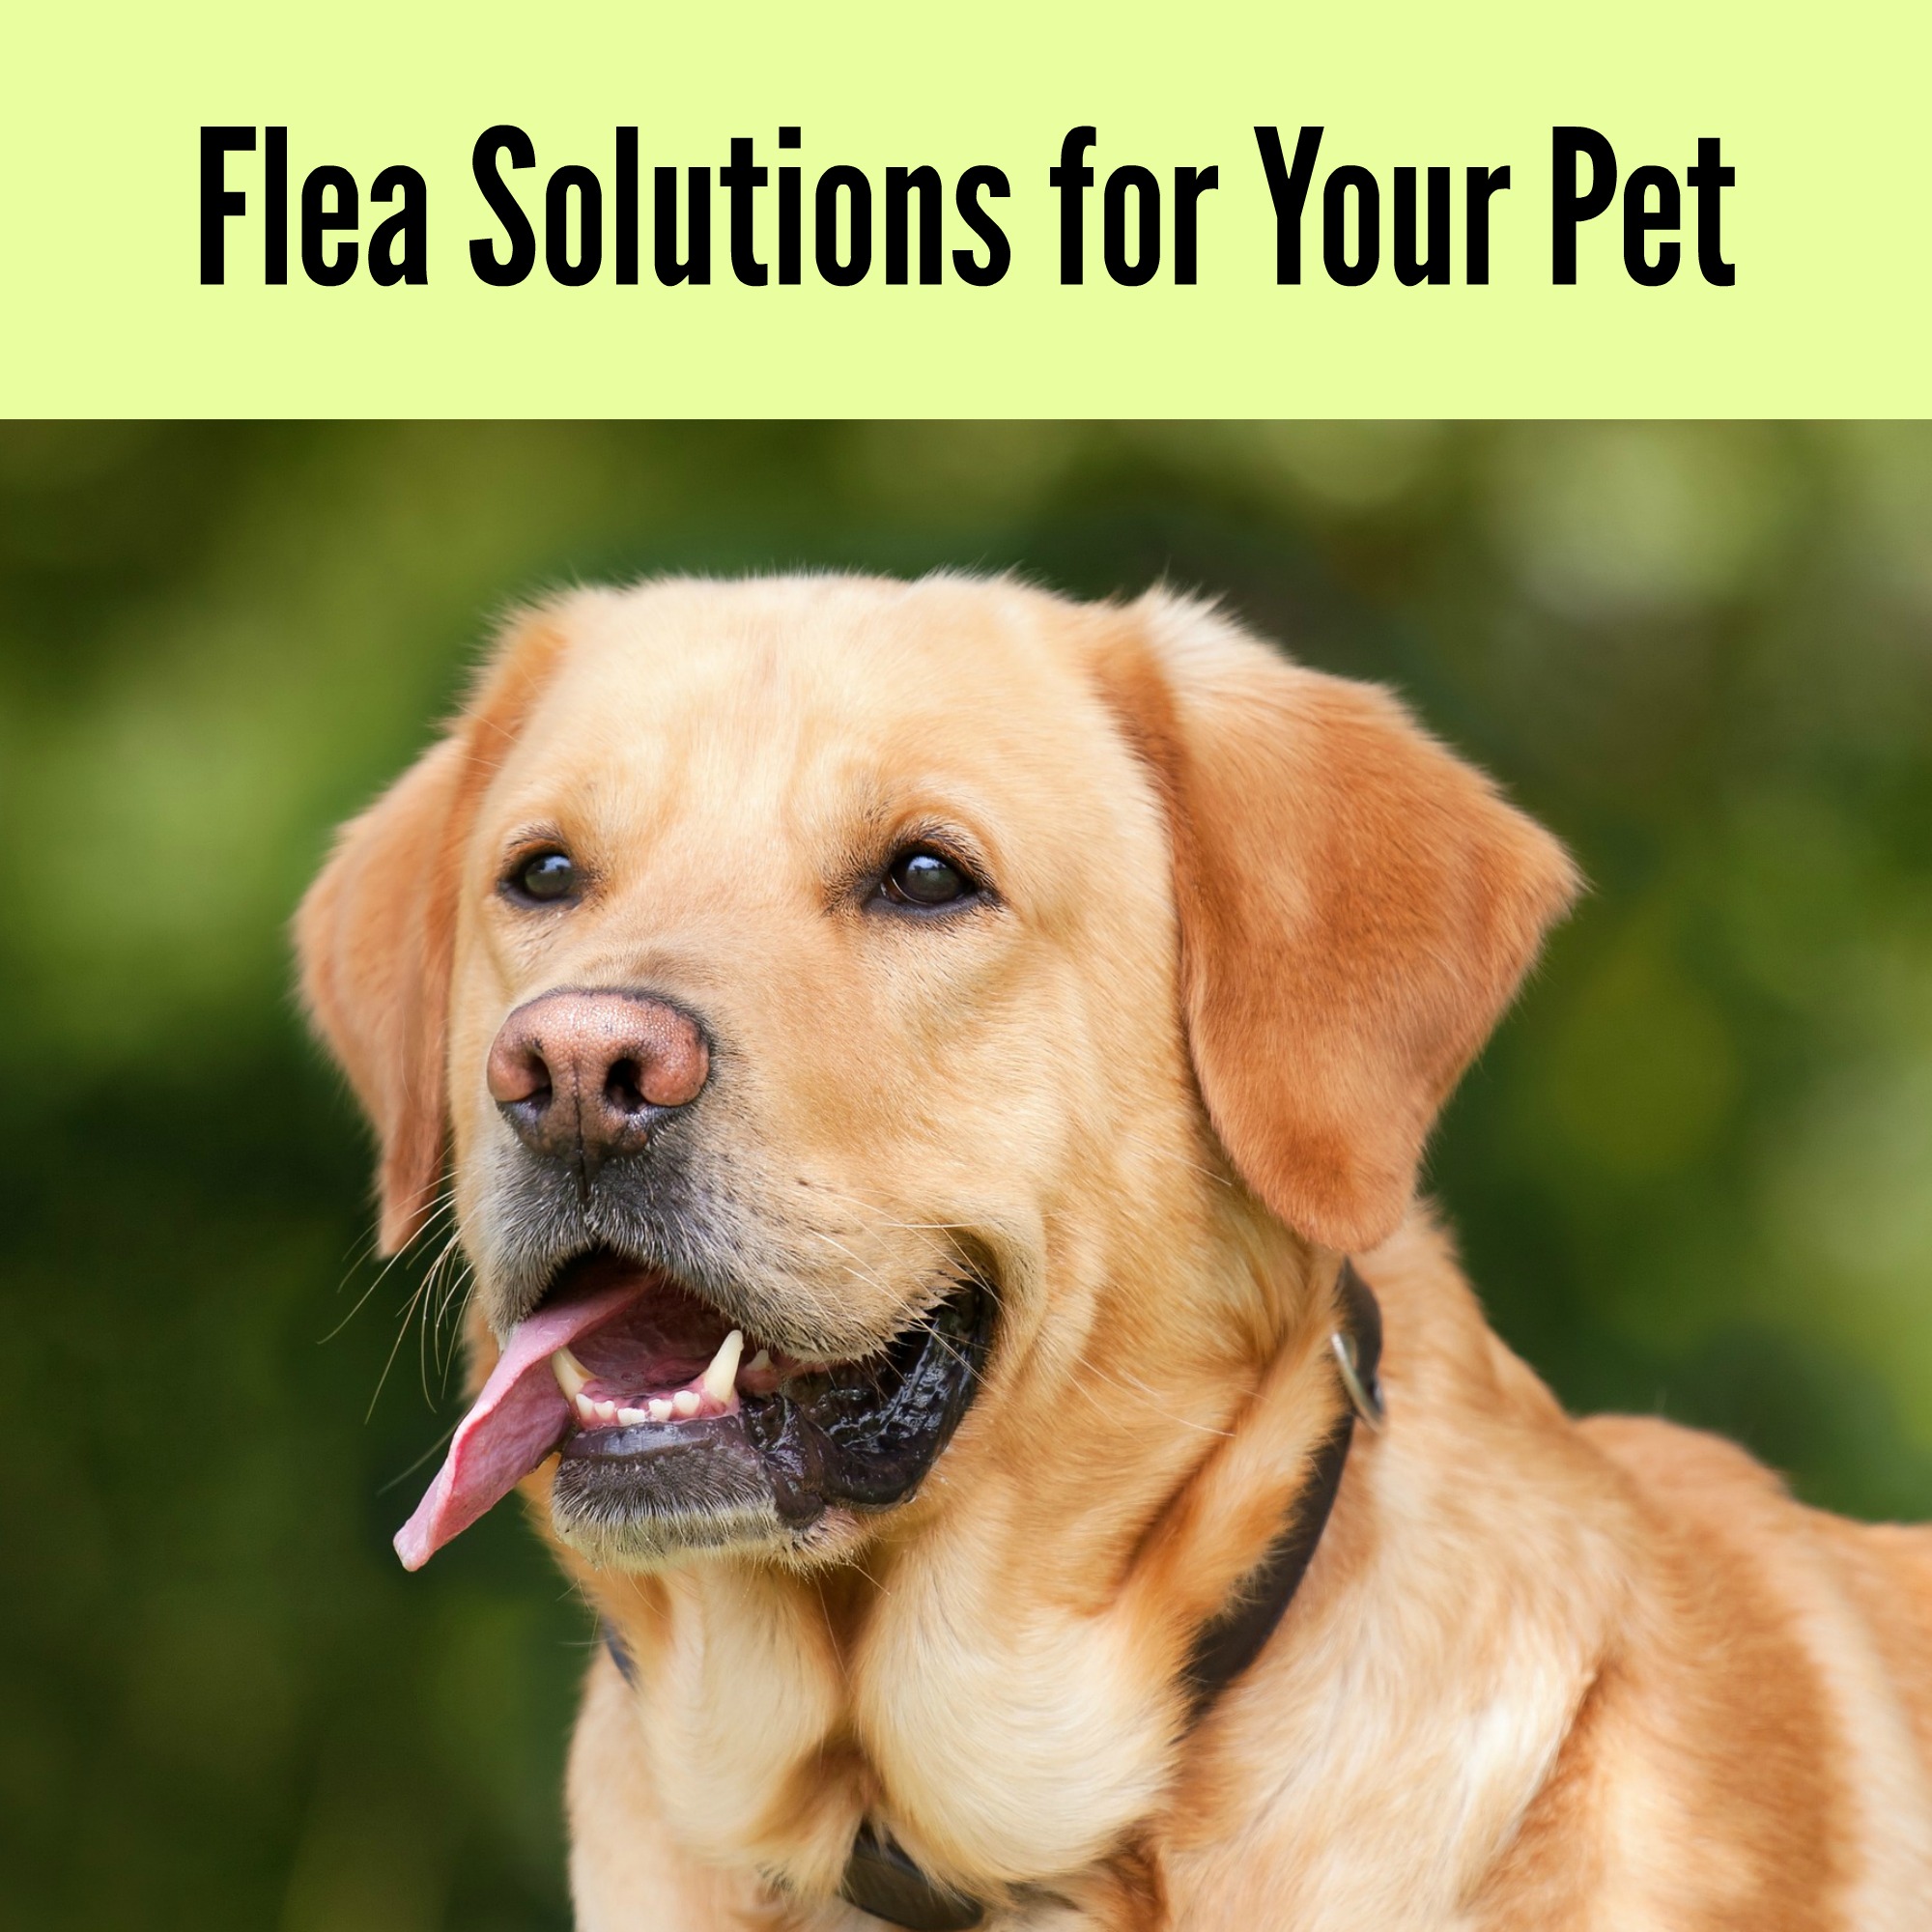 Flea Solutions for Your Pet